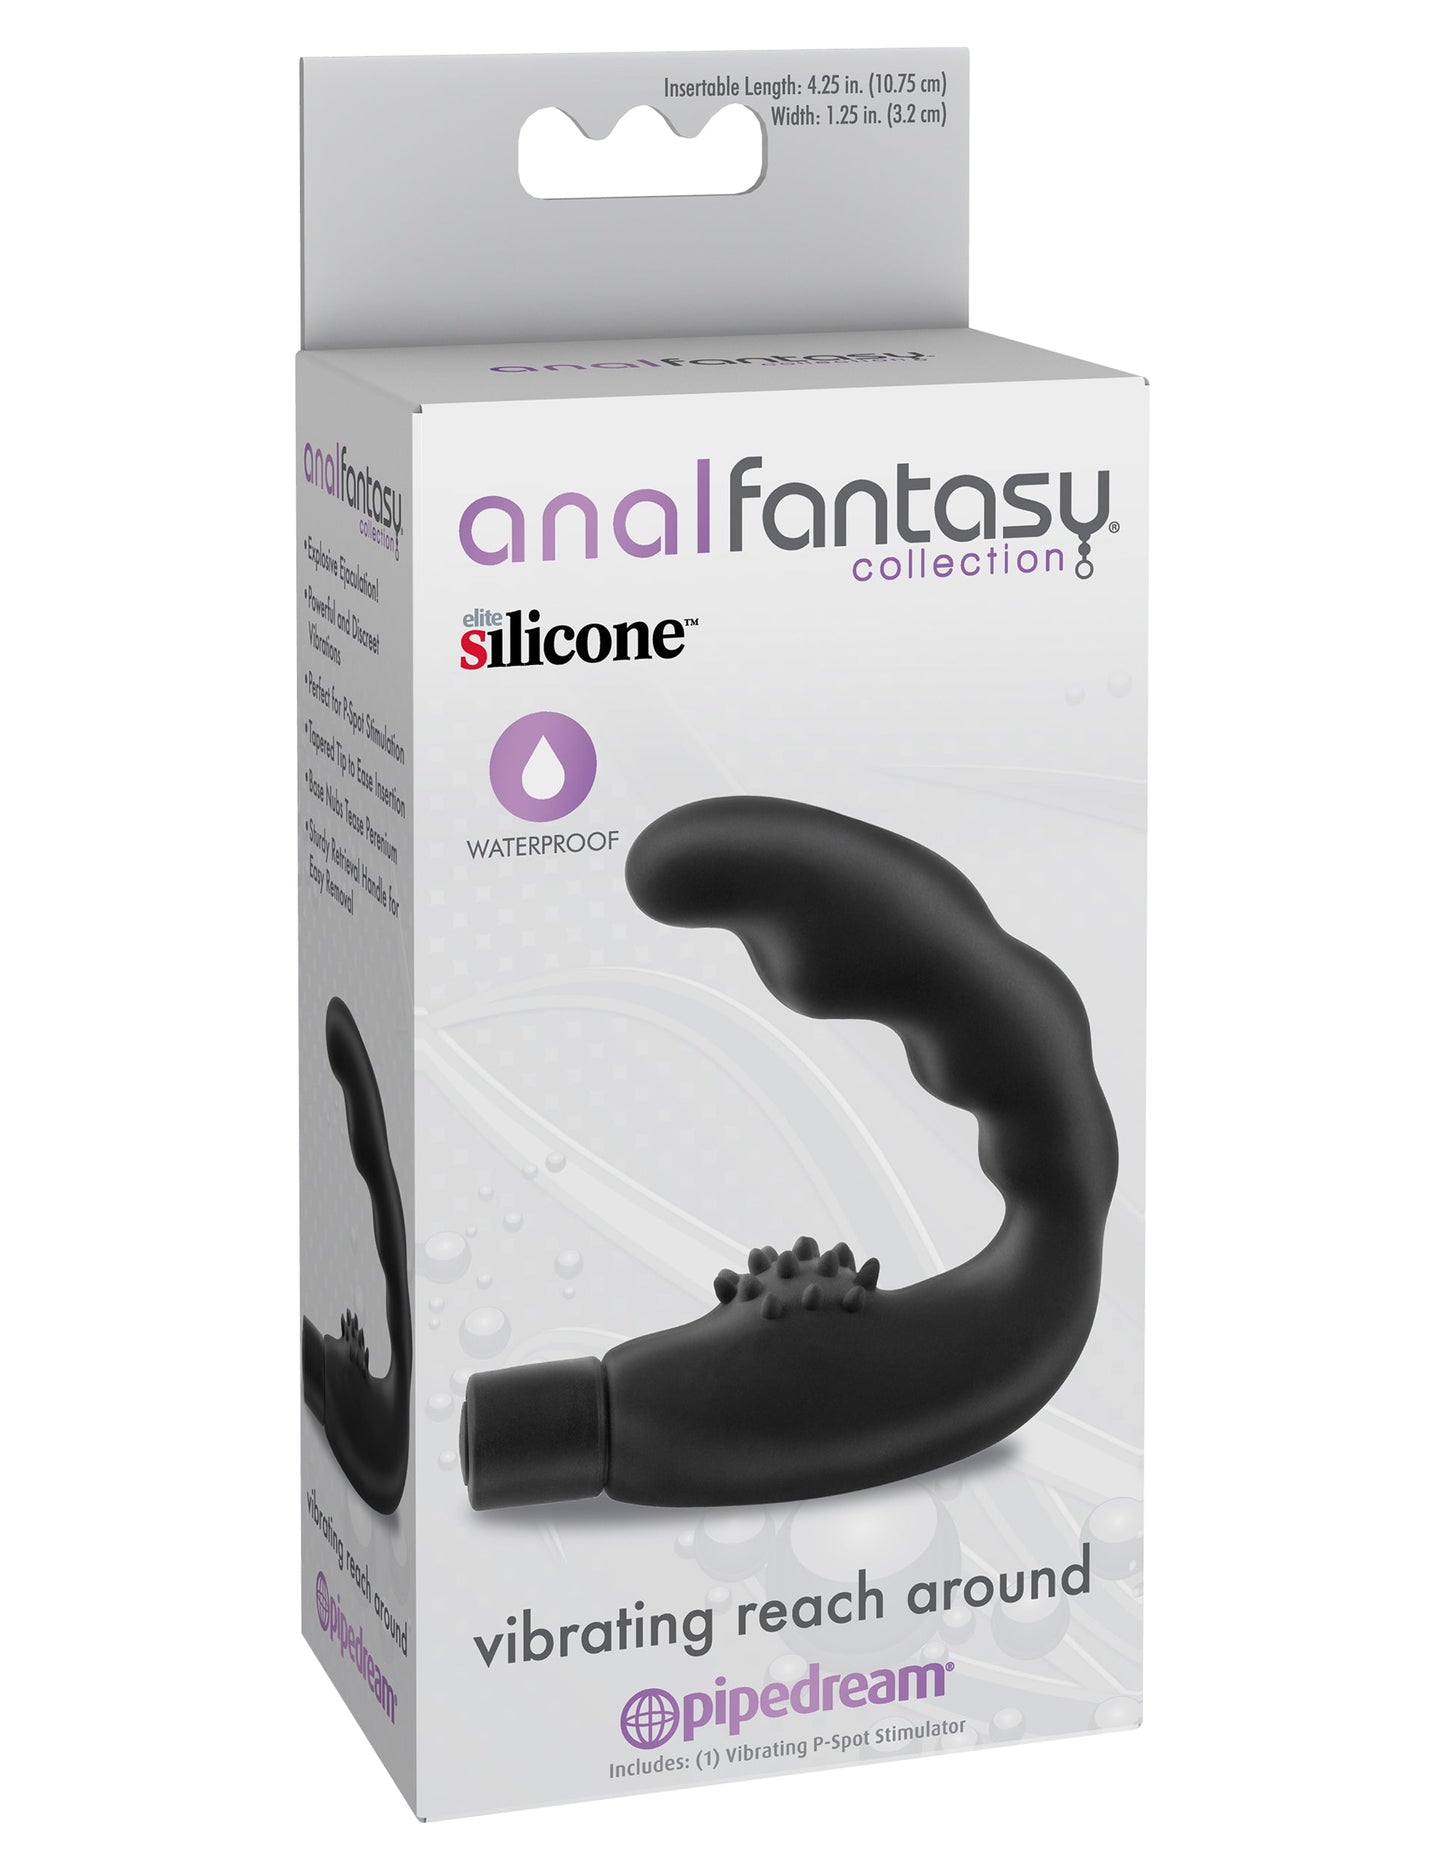 Anal Fantasy Collection | Vibrating Reach Around